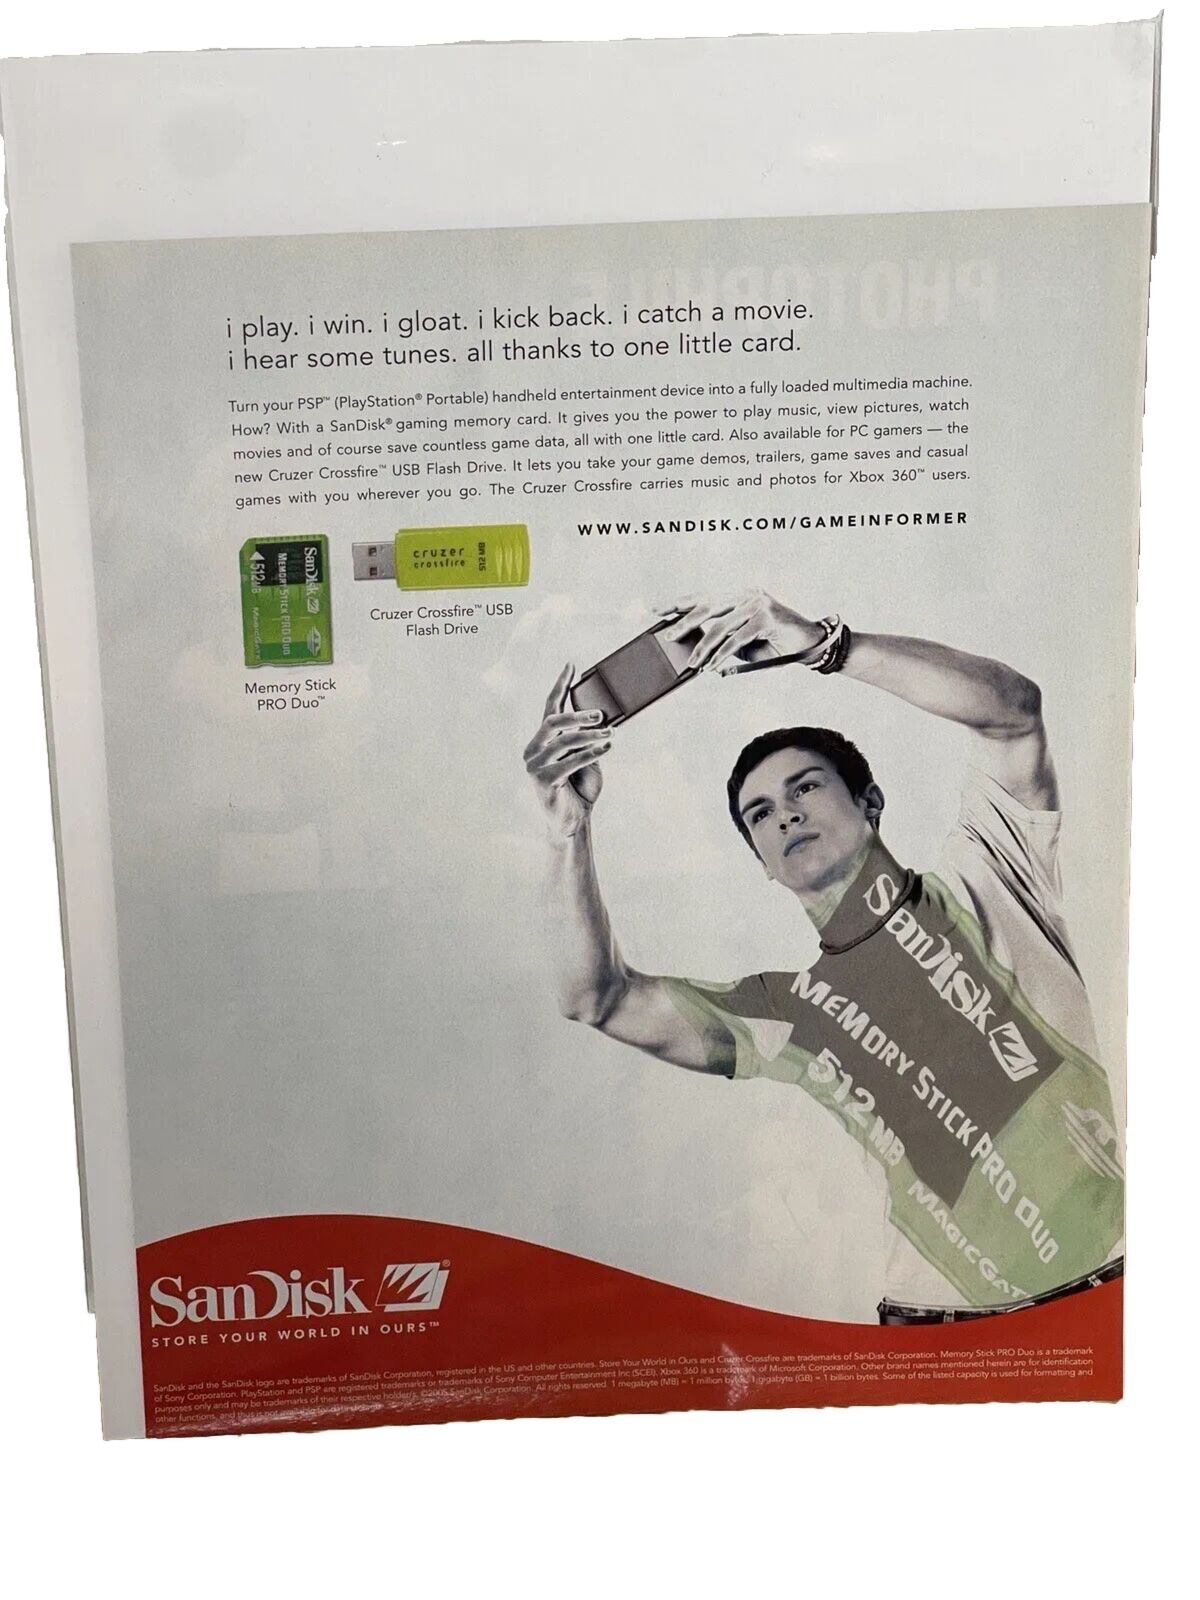 Sandisk Memory Stick Pro Duo PSP - Video Game Print Ad / Poster Promo Art 2006